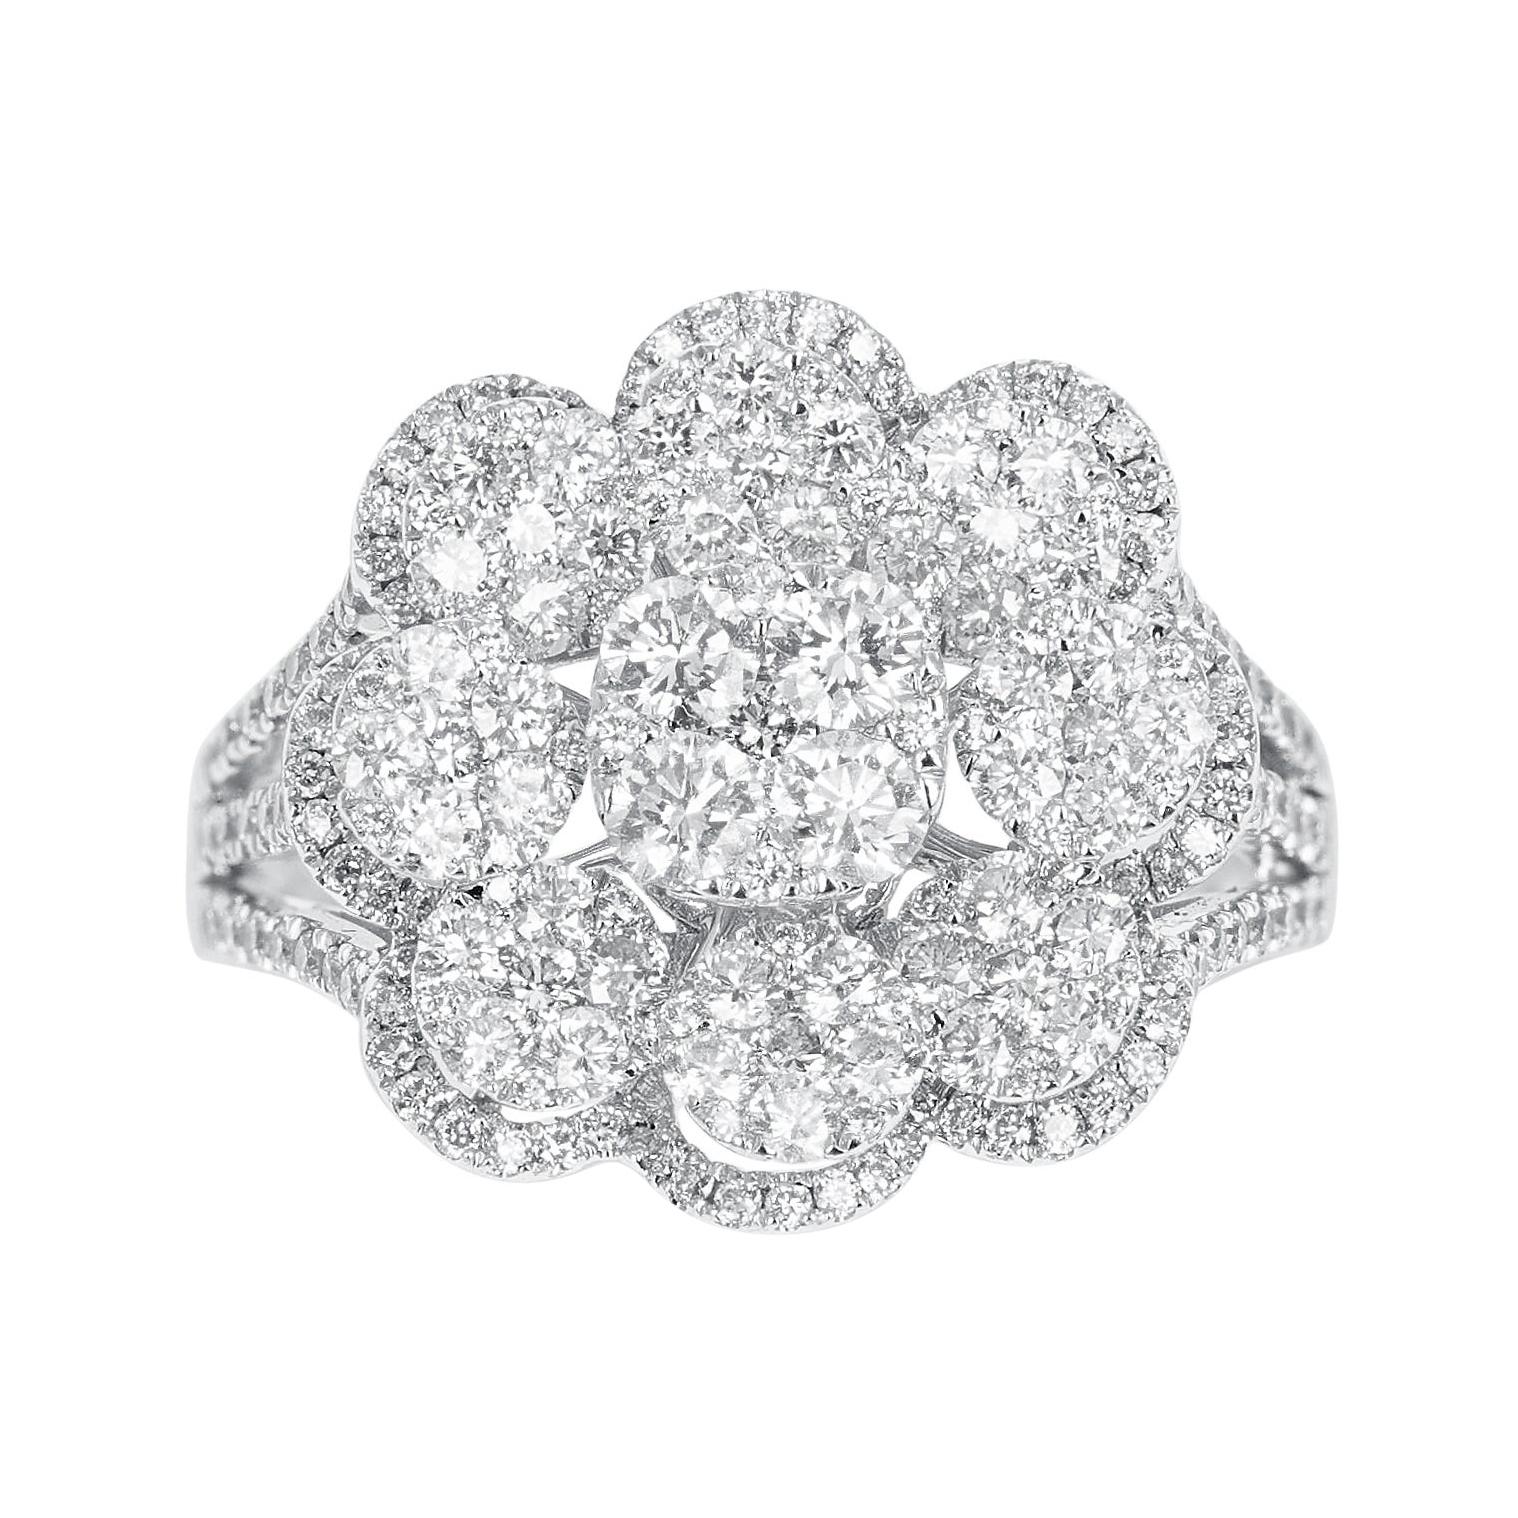 Floral Round Diamonds Cocktail Ring, 18K White Gold